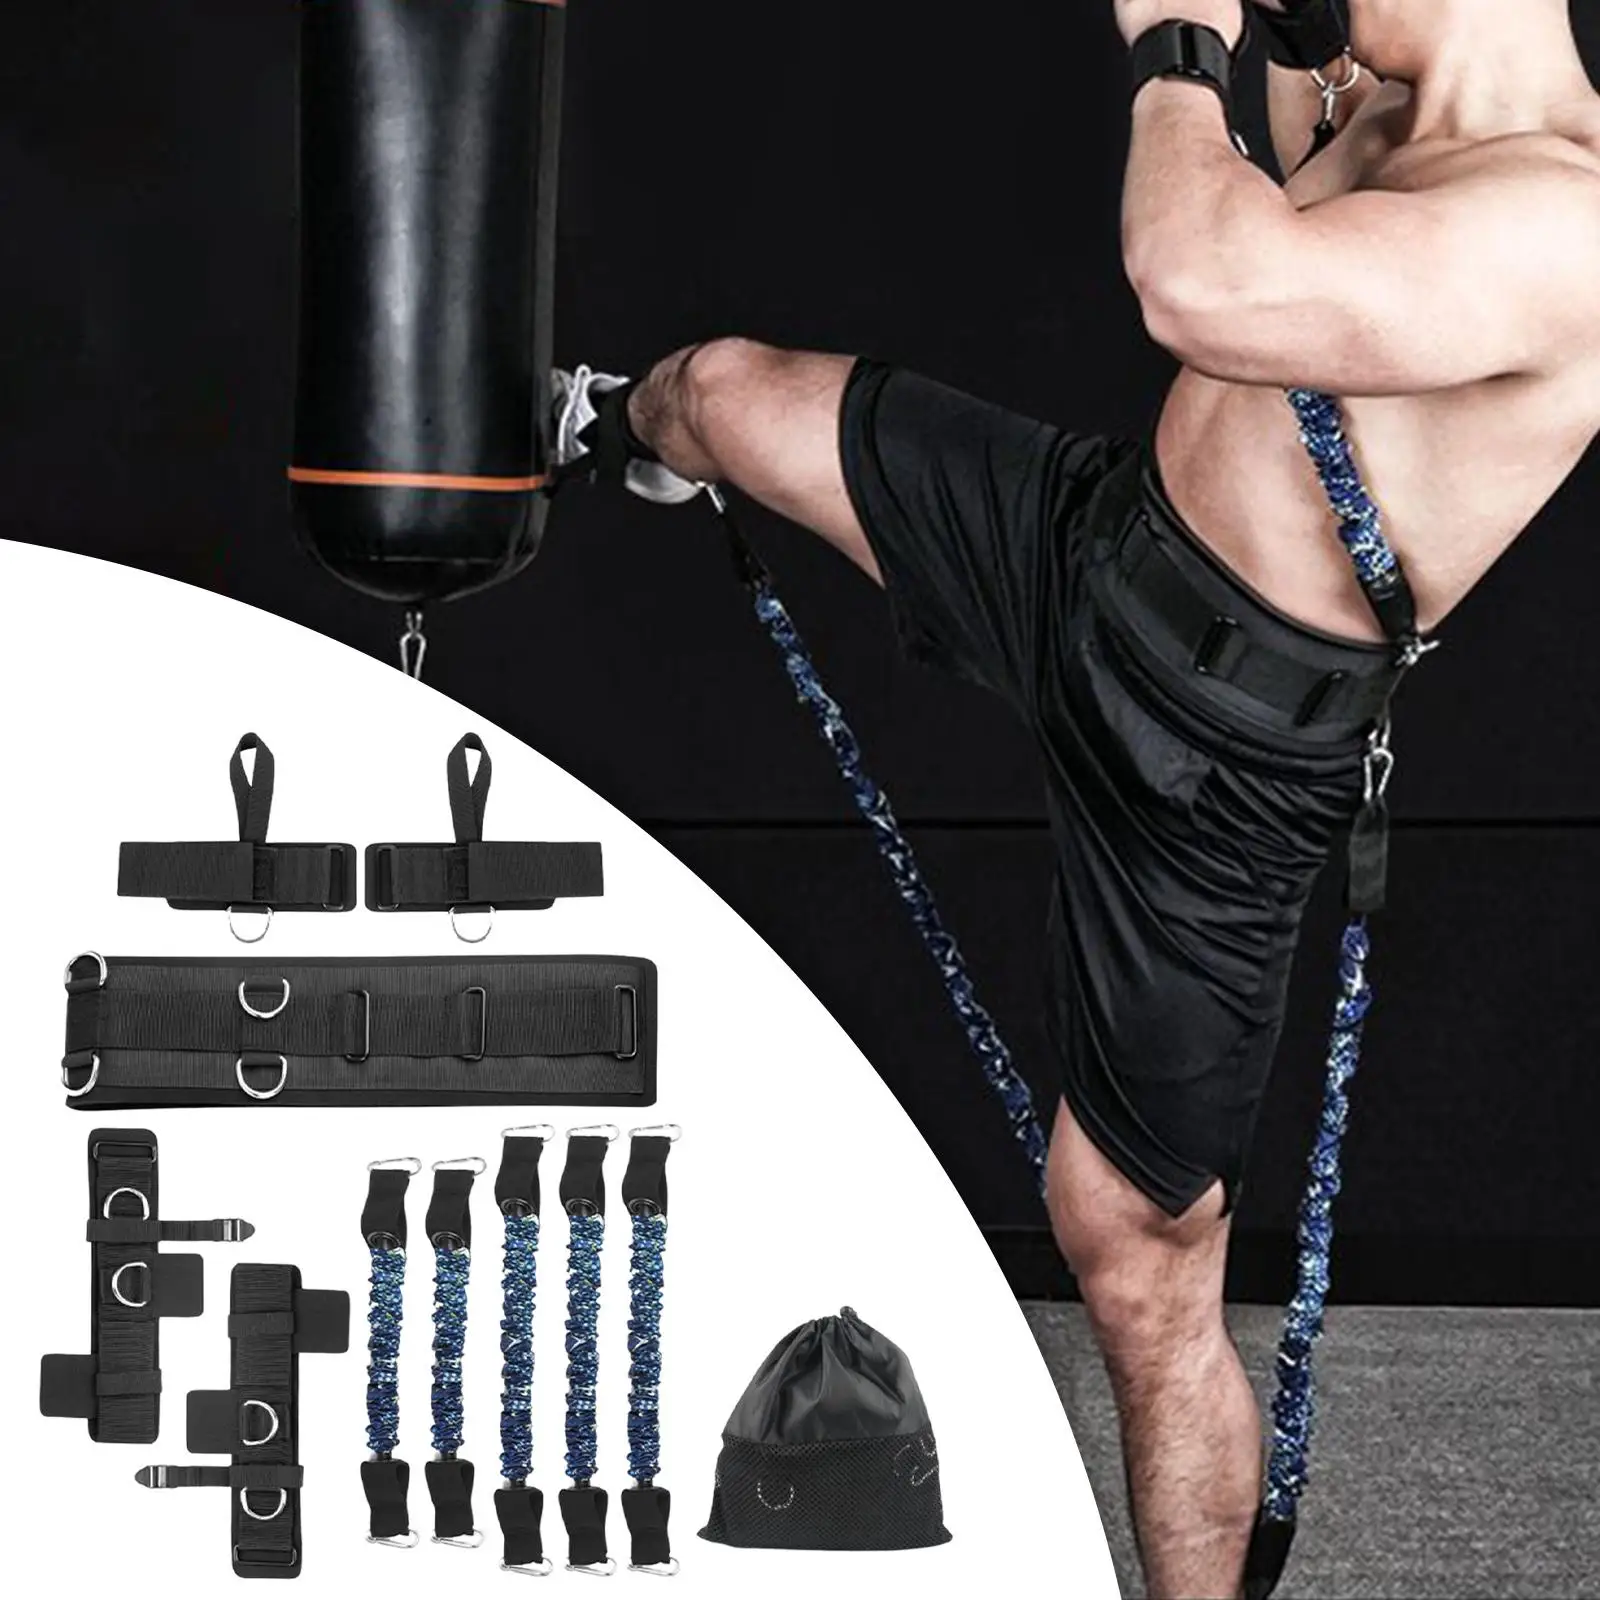 Boxing Resistance Training Exercise Band Kit for Track and Field Sports